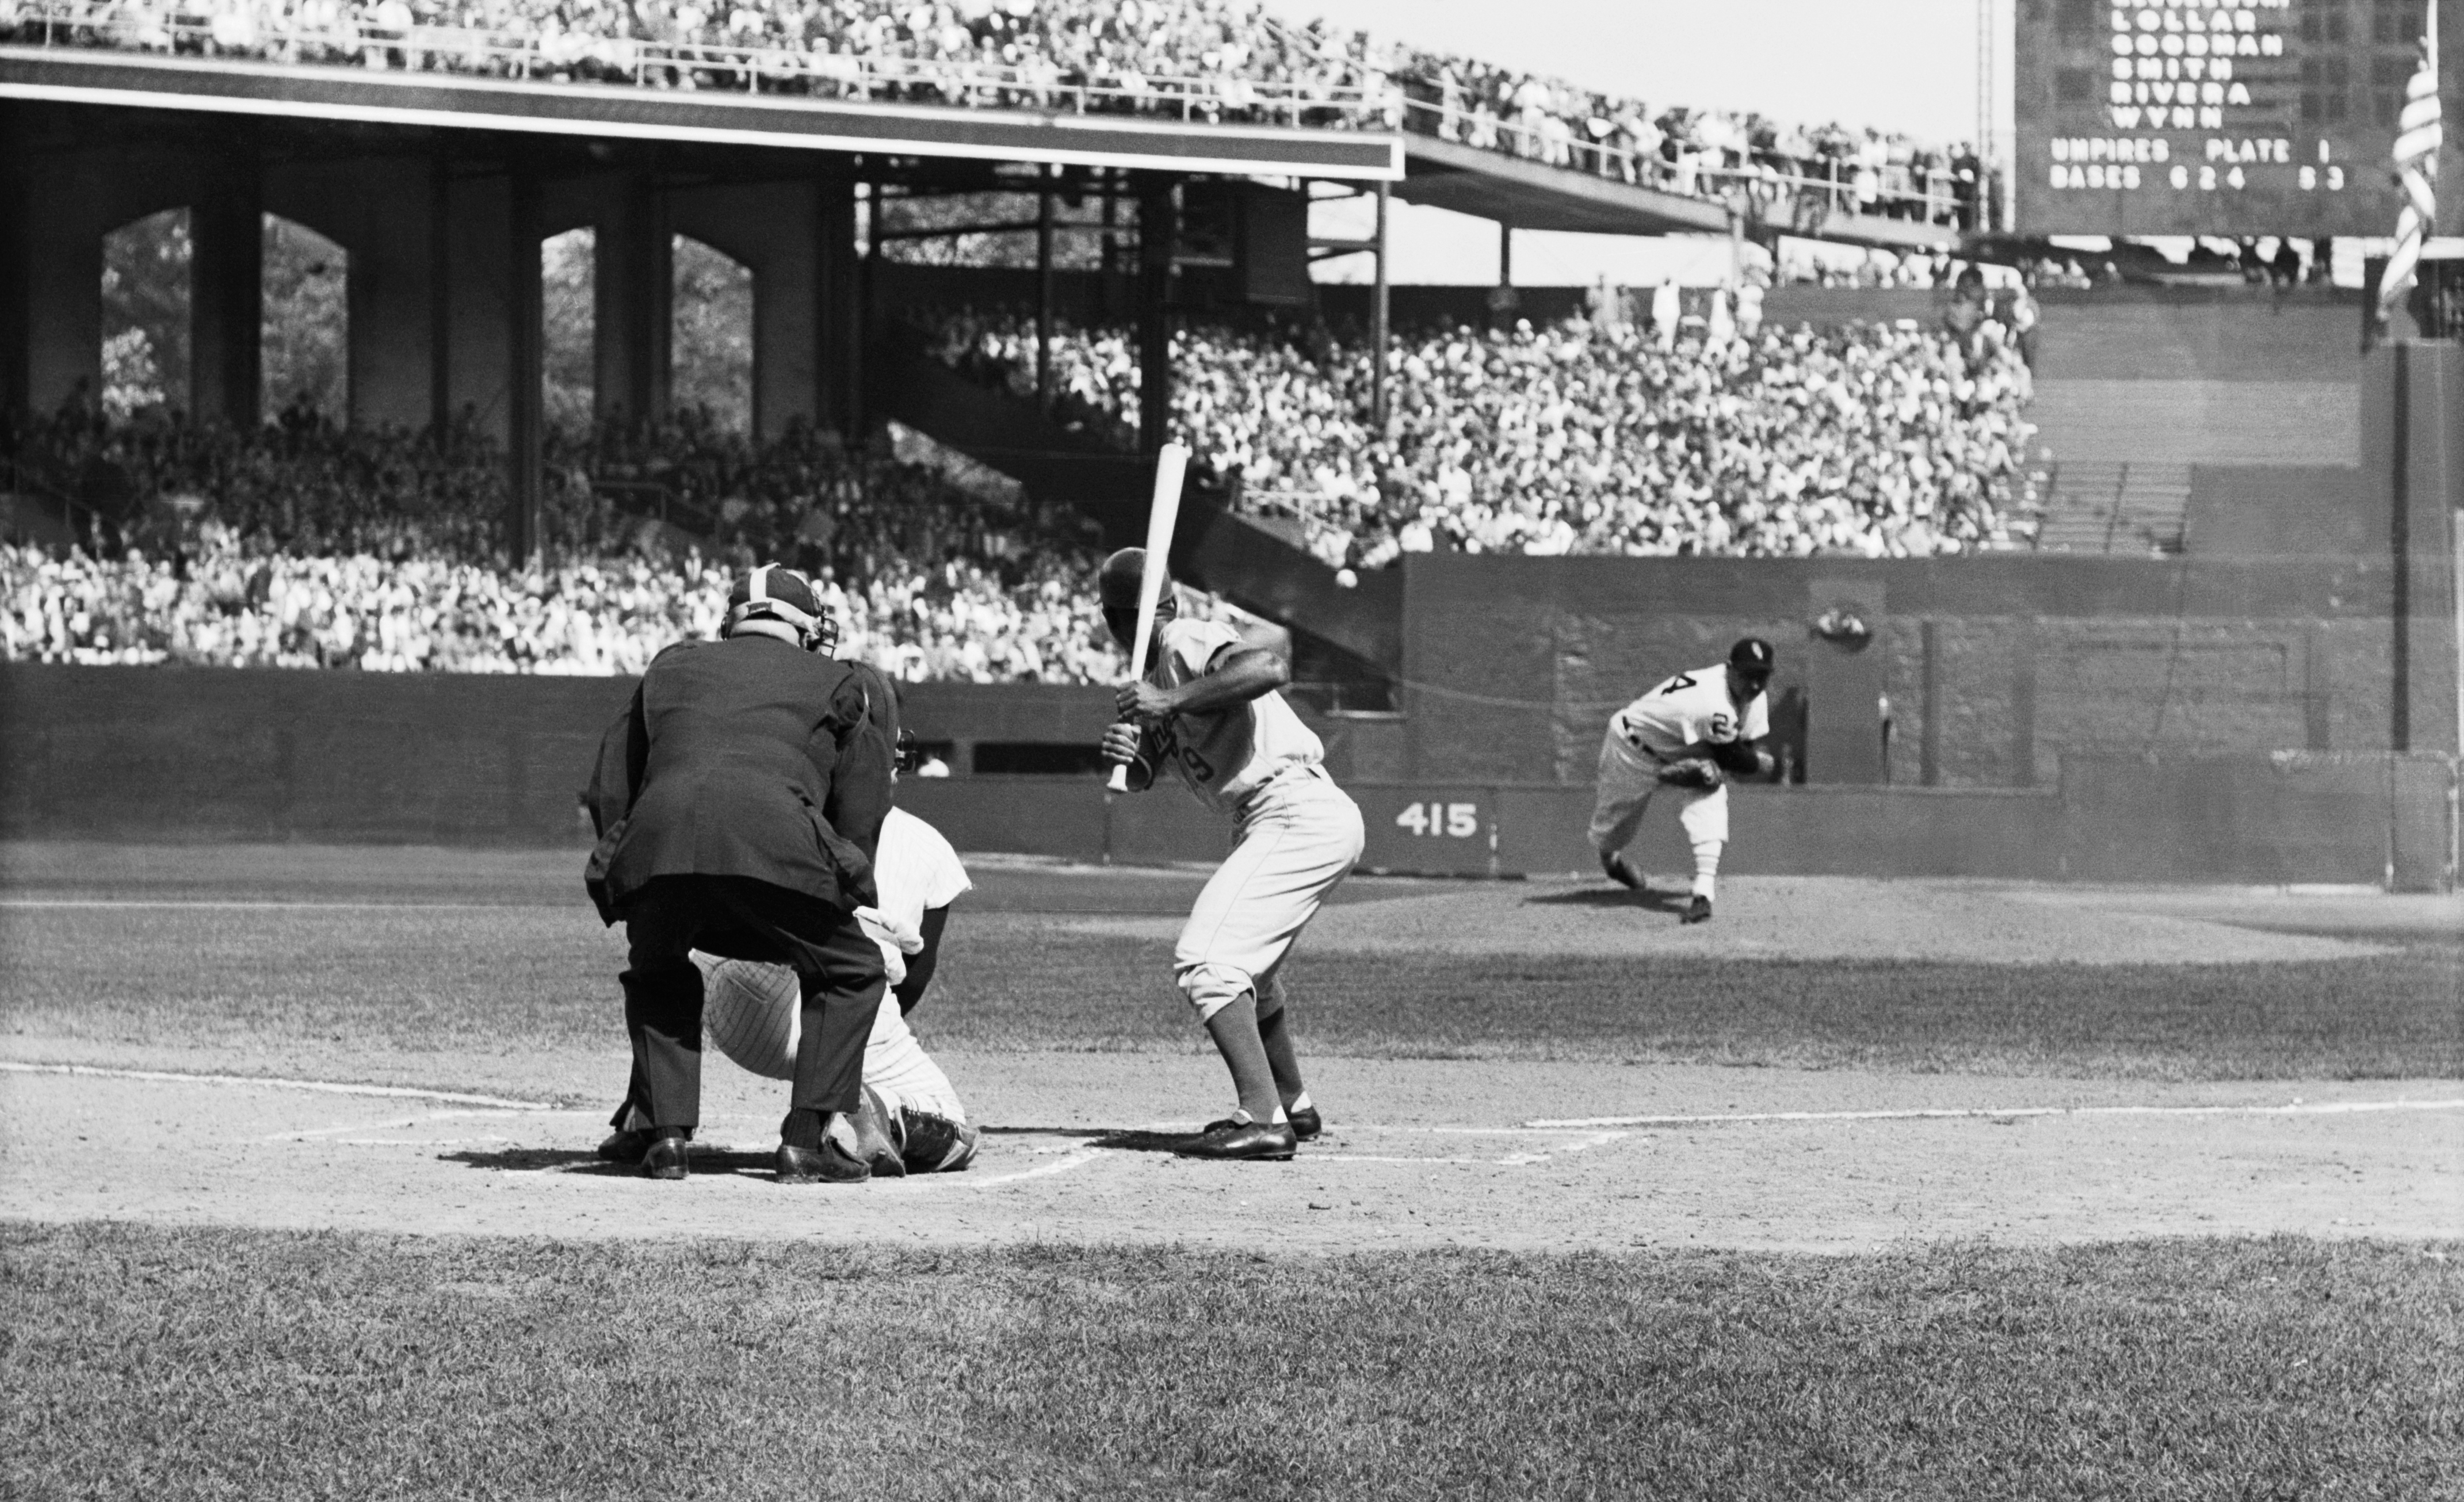 First pitch in 1959 World Series